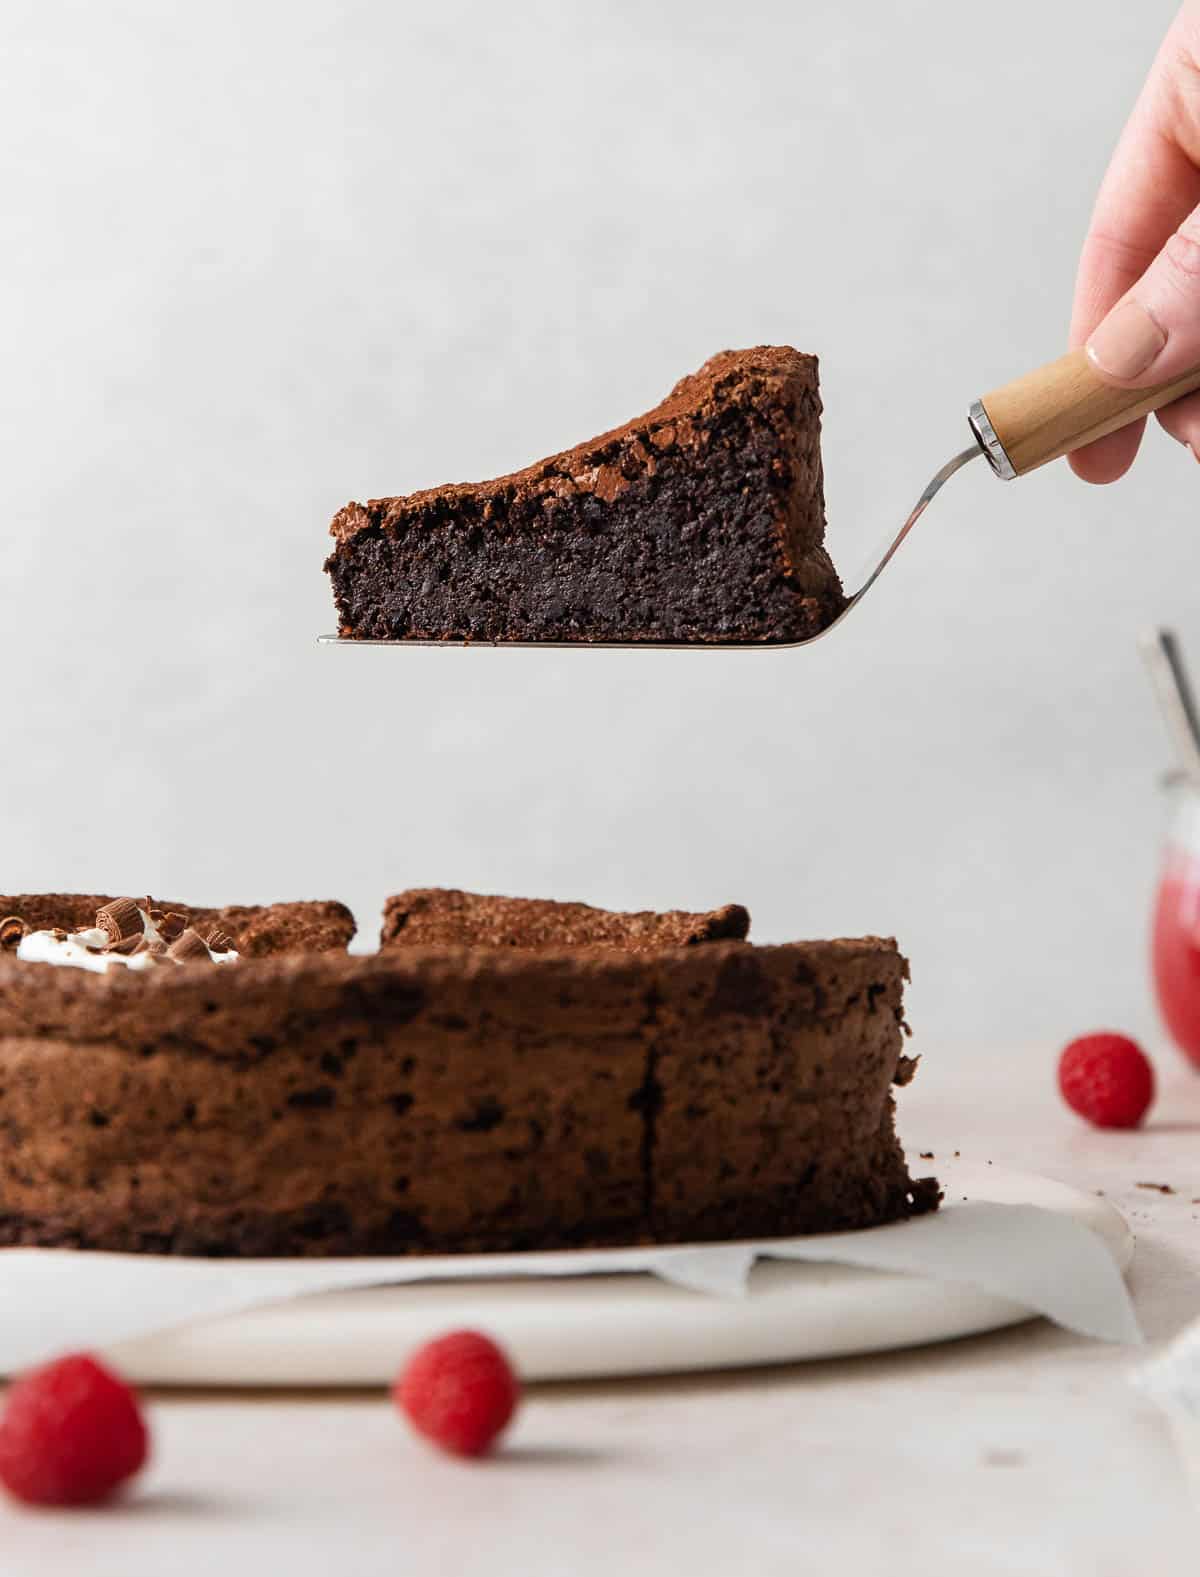 A side view of flourless chocolate torte, and a hand serving up a slice from the platter